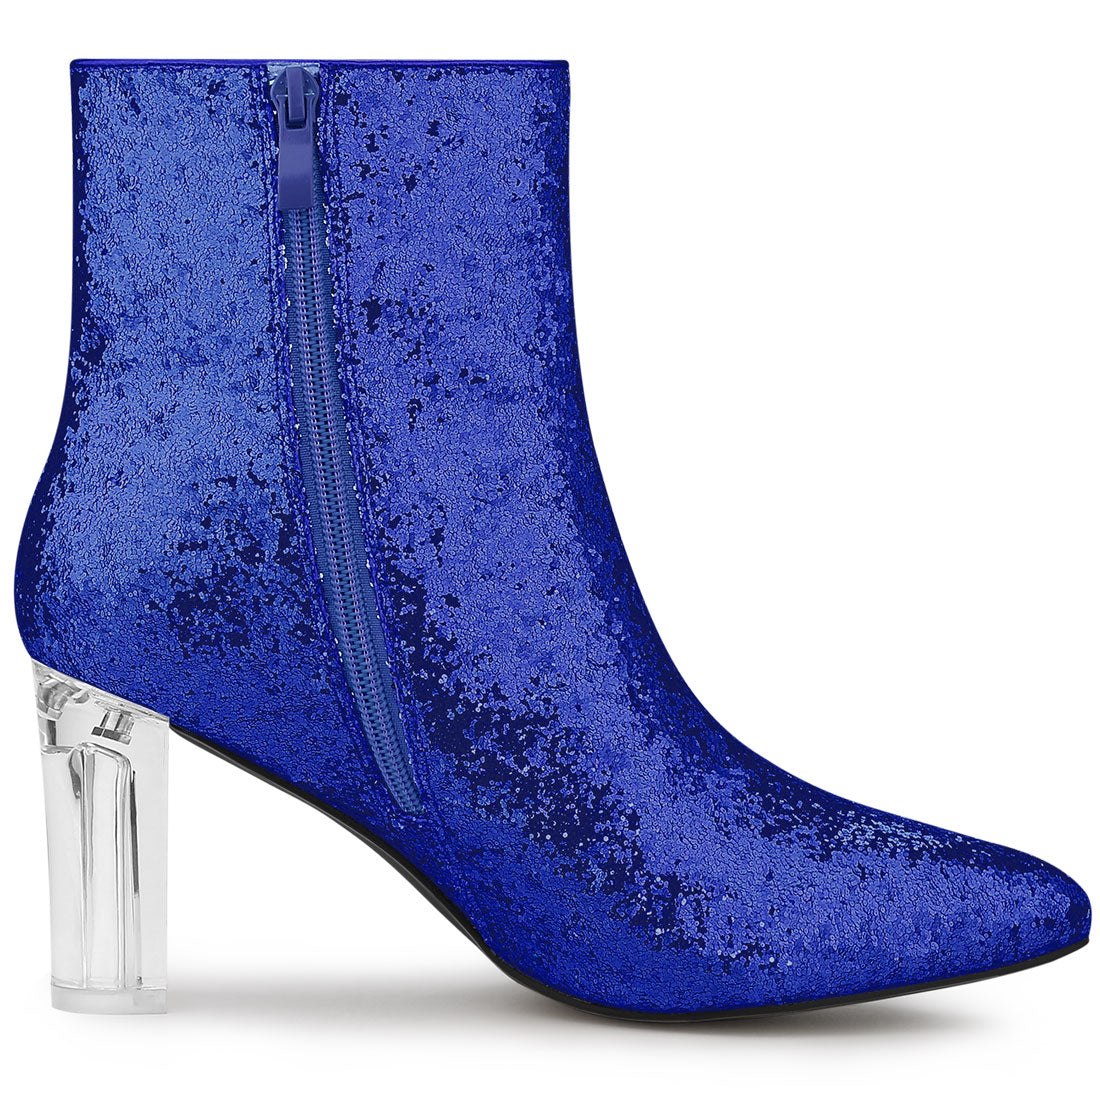 Allegra K Pointed Toe Clear Block Heel Glitter Ankle Boots